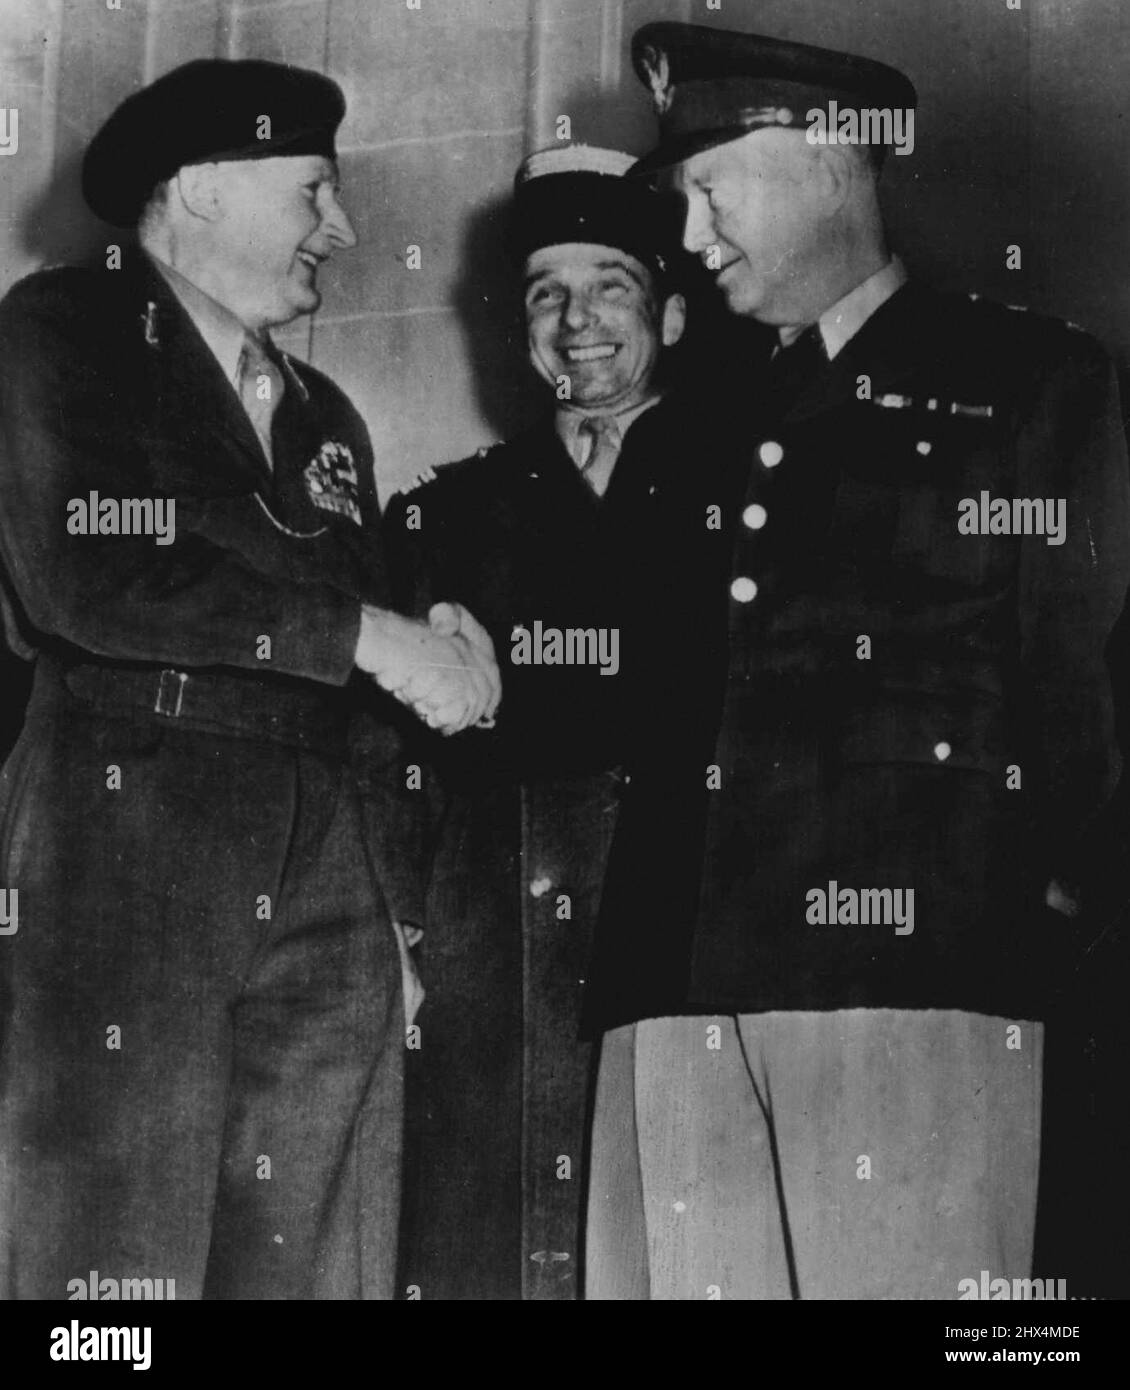 Like Old Times -- Britain's Field Marshal Lord Montgomery (left) and Gen. Dwight D. Eisenhower (right), top-ranking leaders of Allied forces in western Europe in World War II, shake hands at Hotel Raphael in Paris today following Ike's arrival to take command of North Atlantic pact nations' forces in western Europe. Monty, head of the Western Union military organization, may become one of Ike's top level associates in the defense of western Europe against Communism. In center is French Col. Costa de Beauregard, Montgomery's aide. January 7, 1951. (Photo by AP Wirephoto). Stock Photo